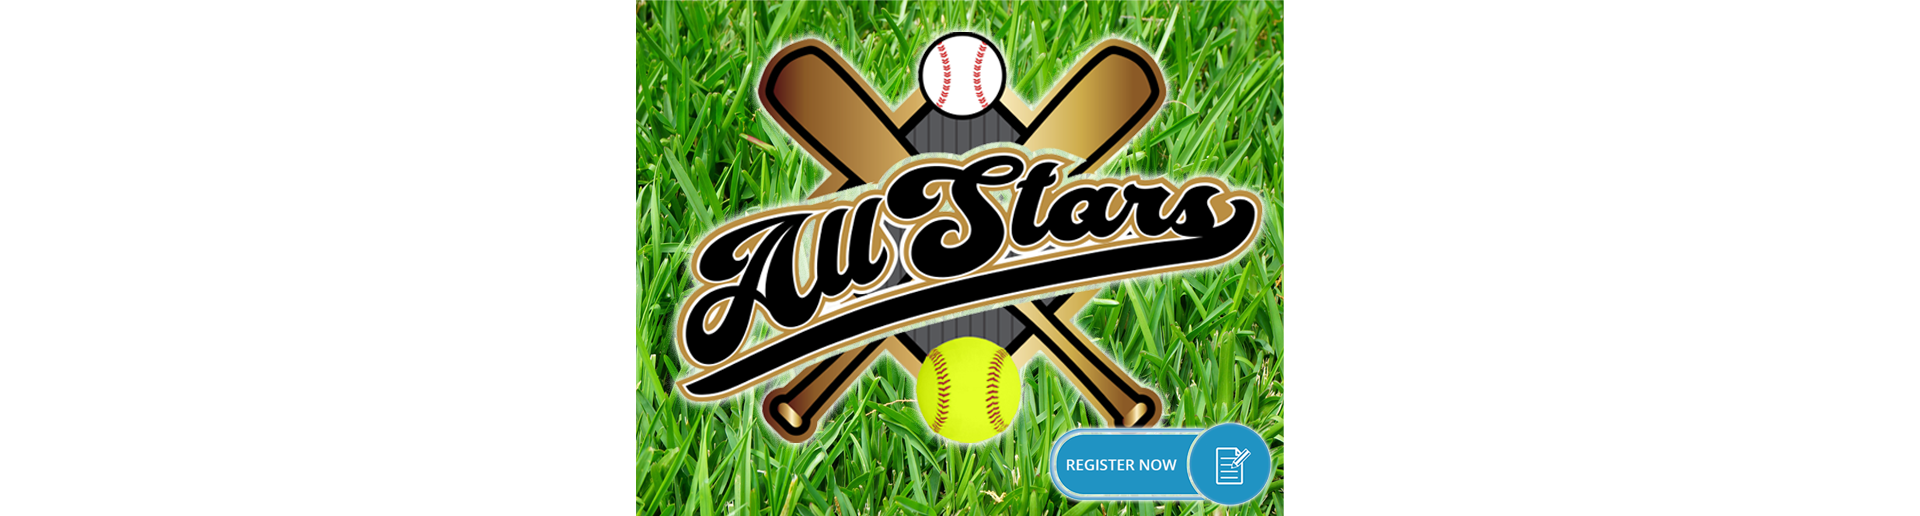 All Stars registration is NOW OPEN